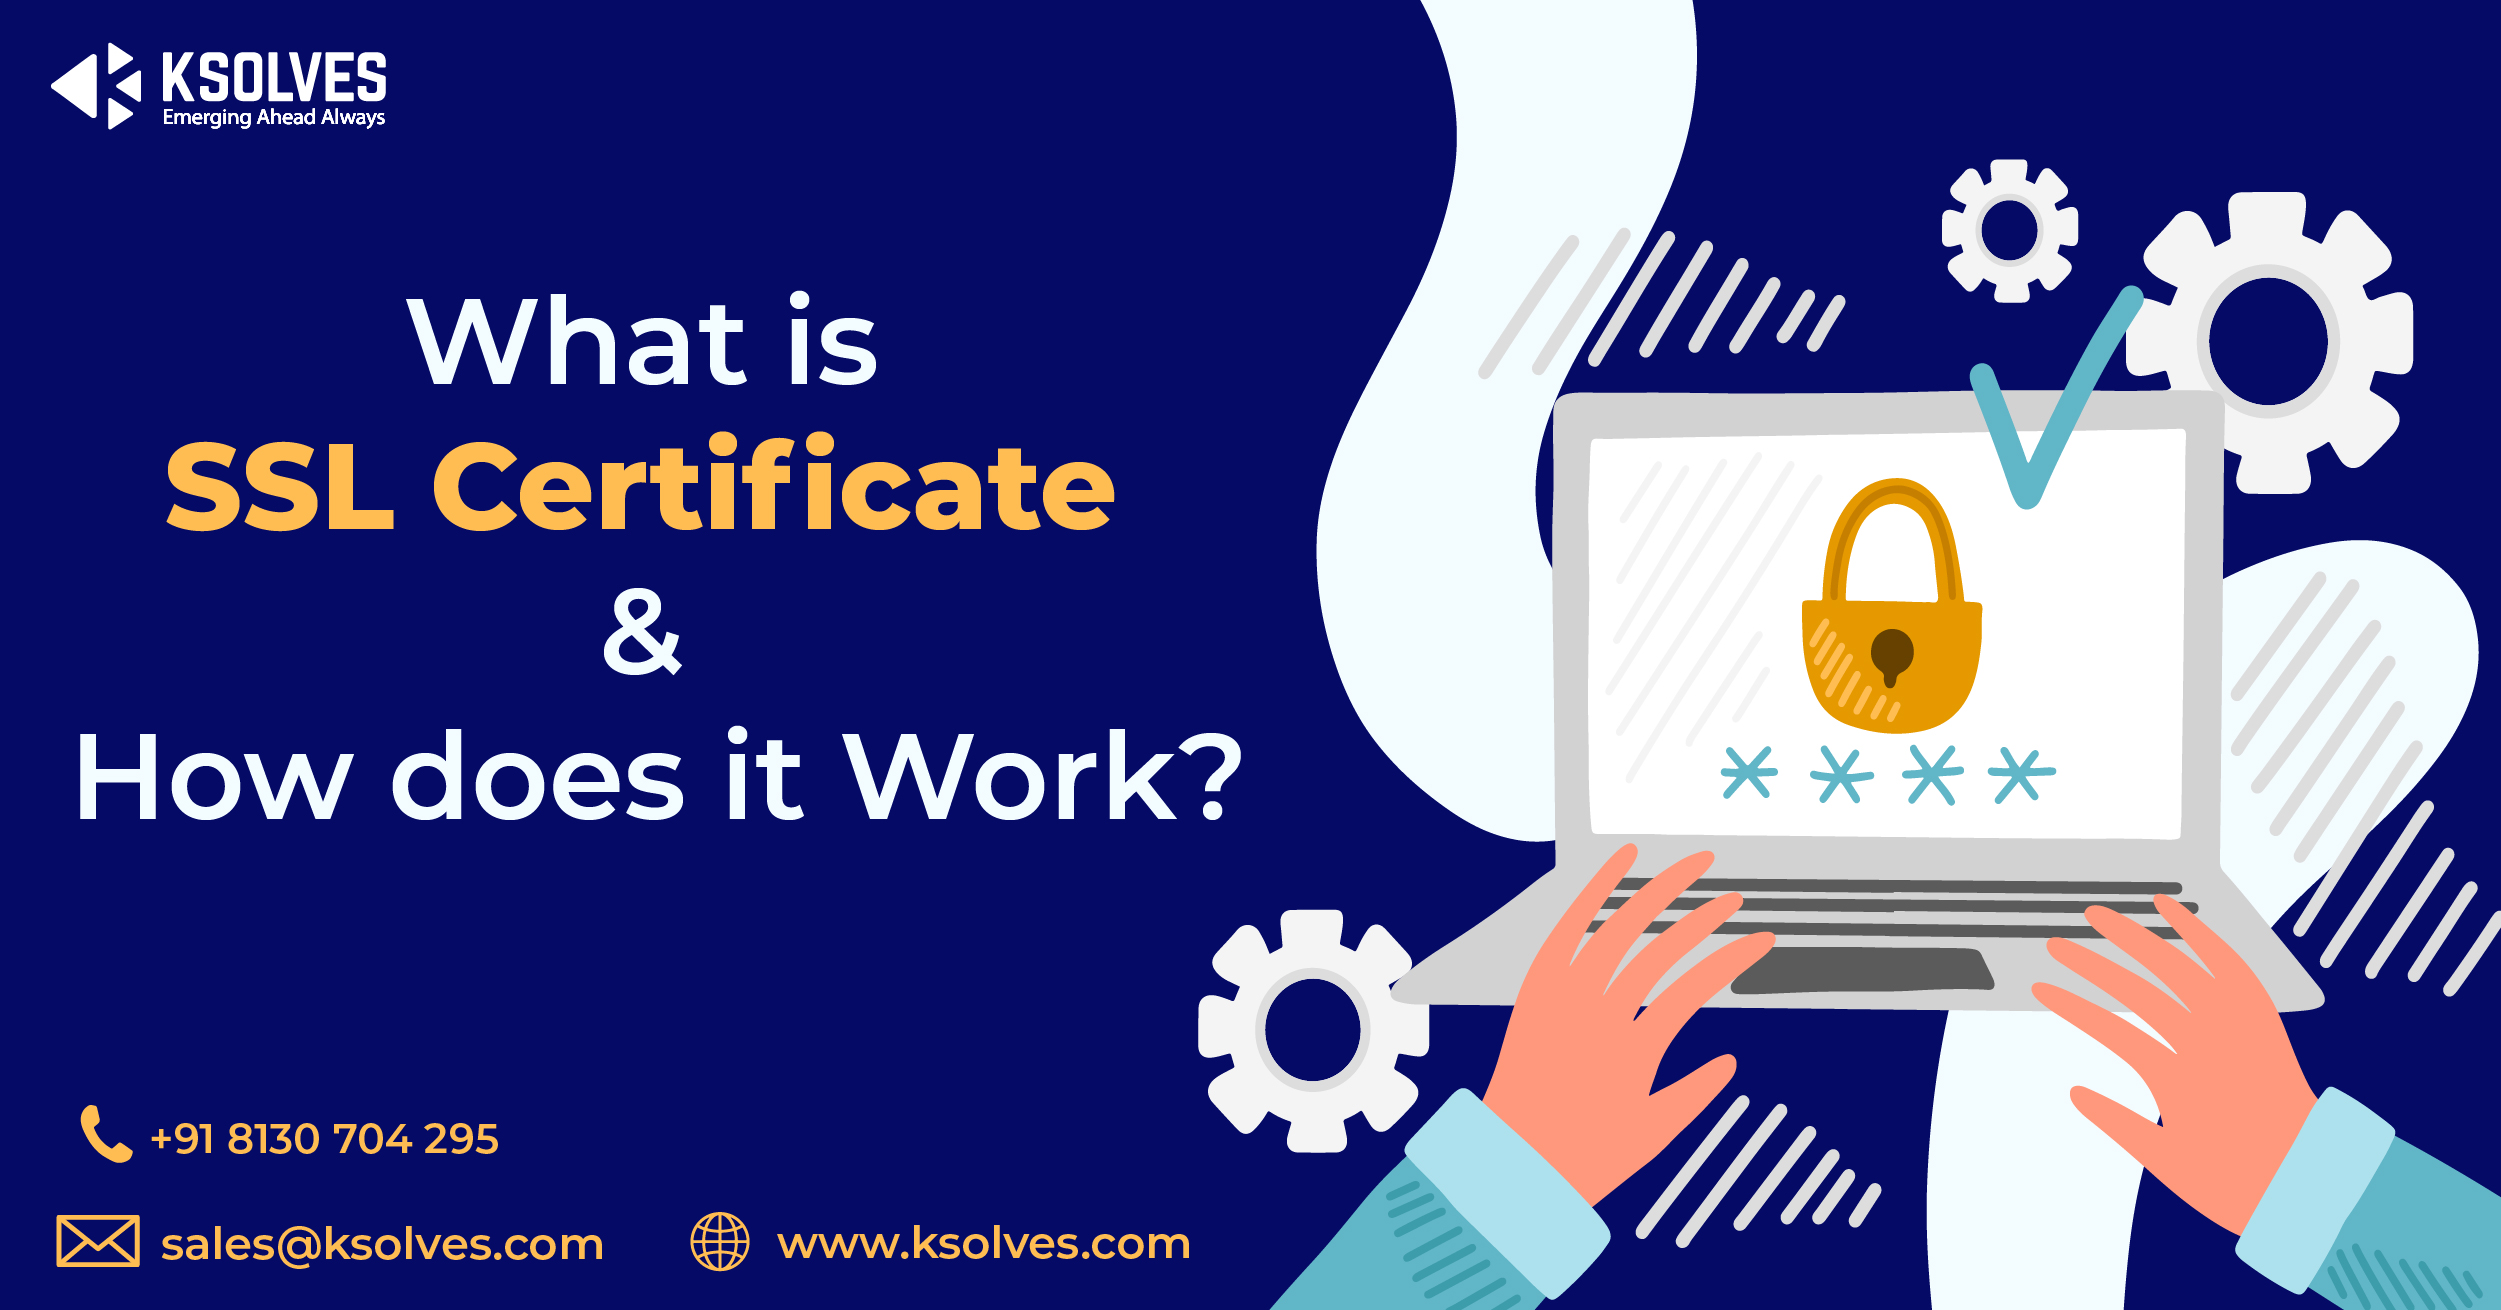 What is SSL Certificate and How Does it Work?